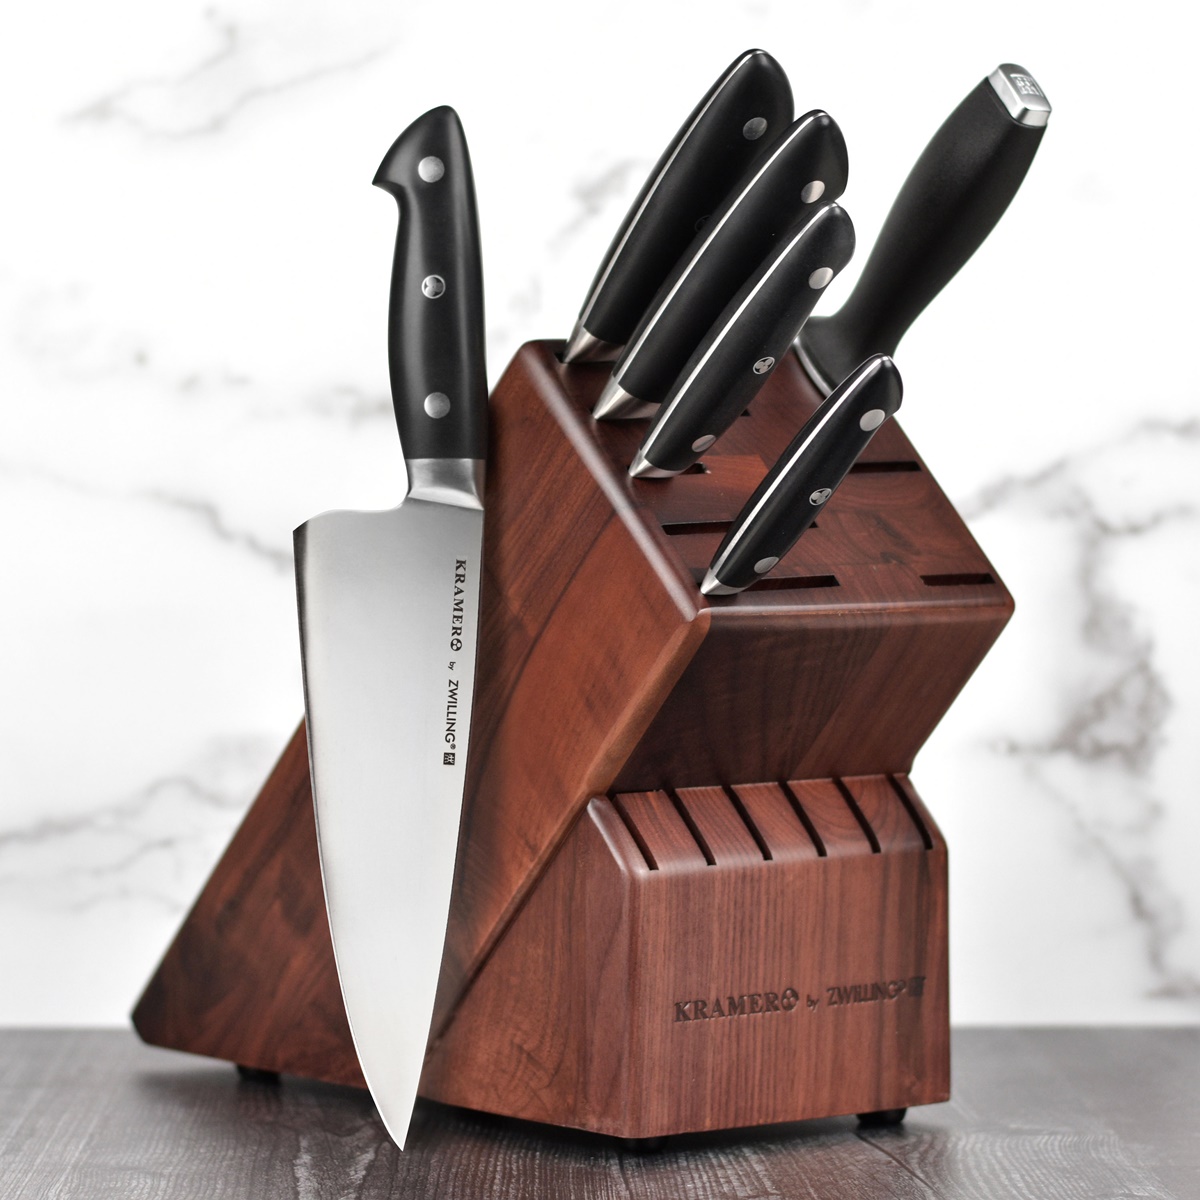 What Are The Correct Knives That Go Into The Zwilling J.A. Henckels Super Knife Block